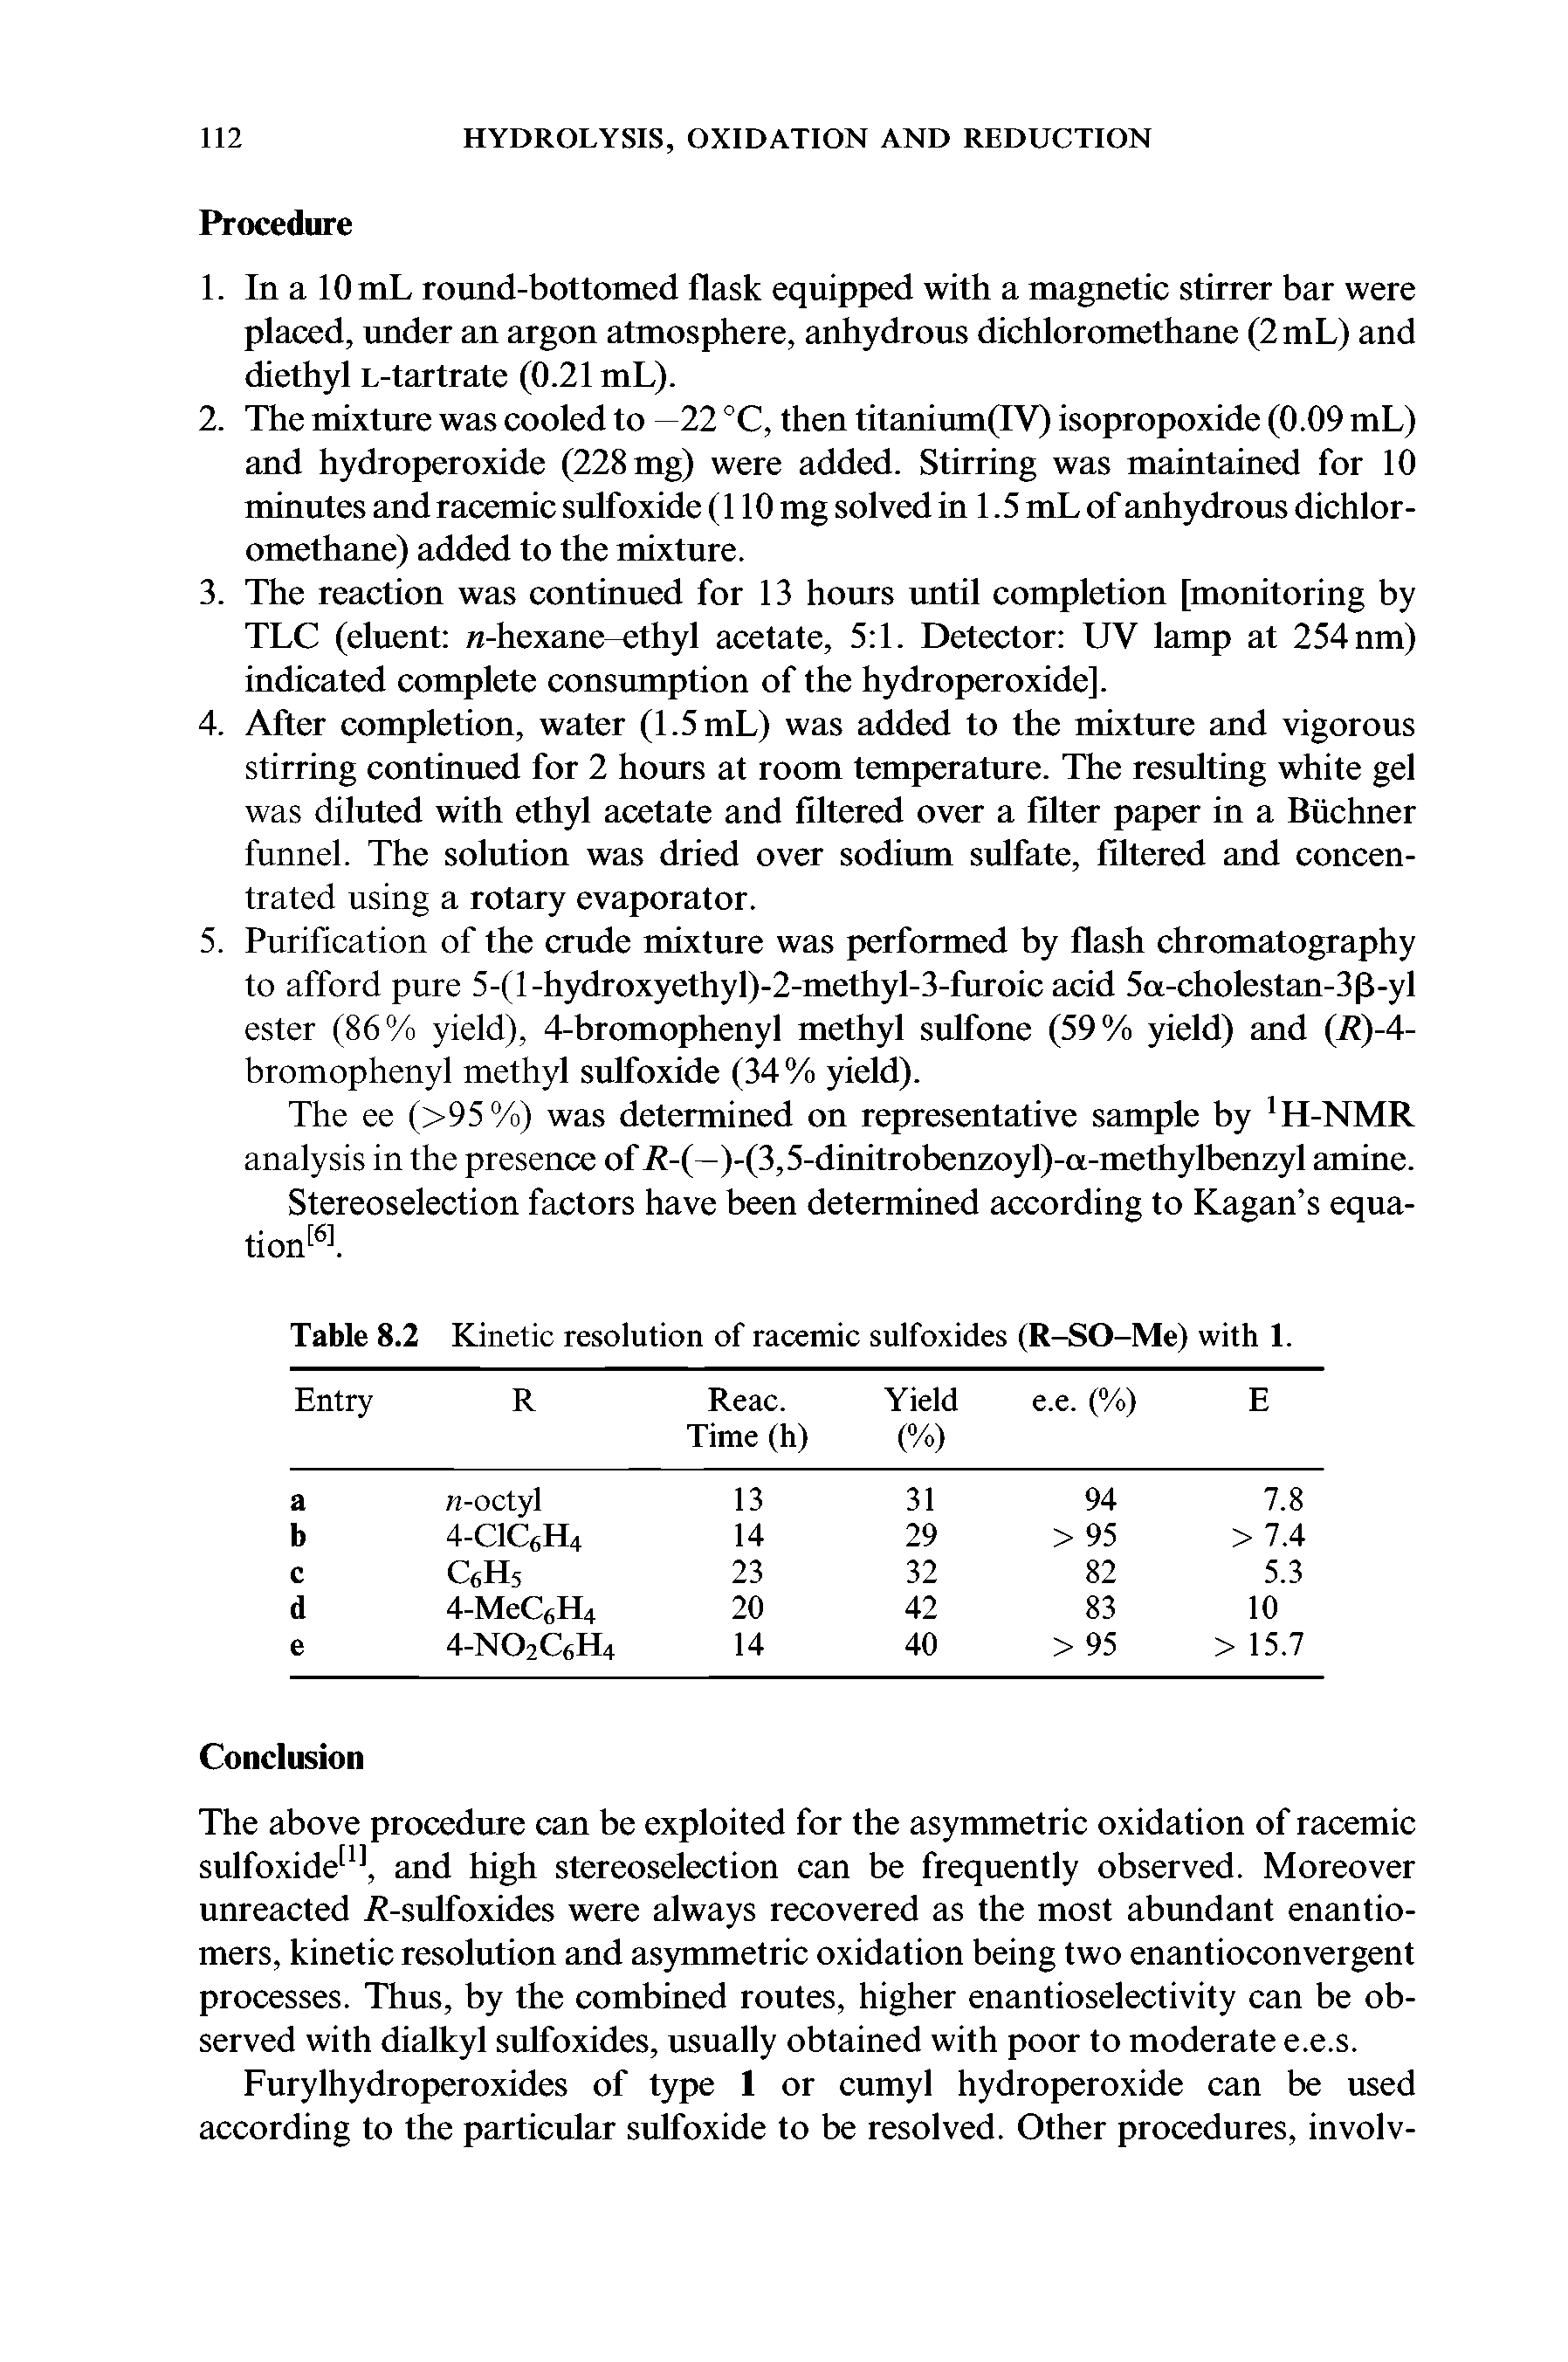 Table 8.2 Kinetic resolution of racemic sulfoxides (R-SO-Me) with 1.